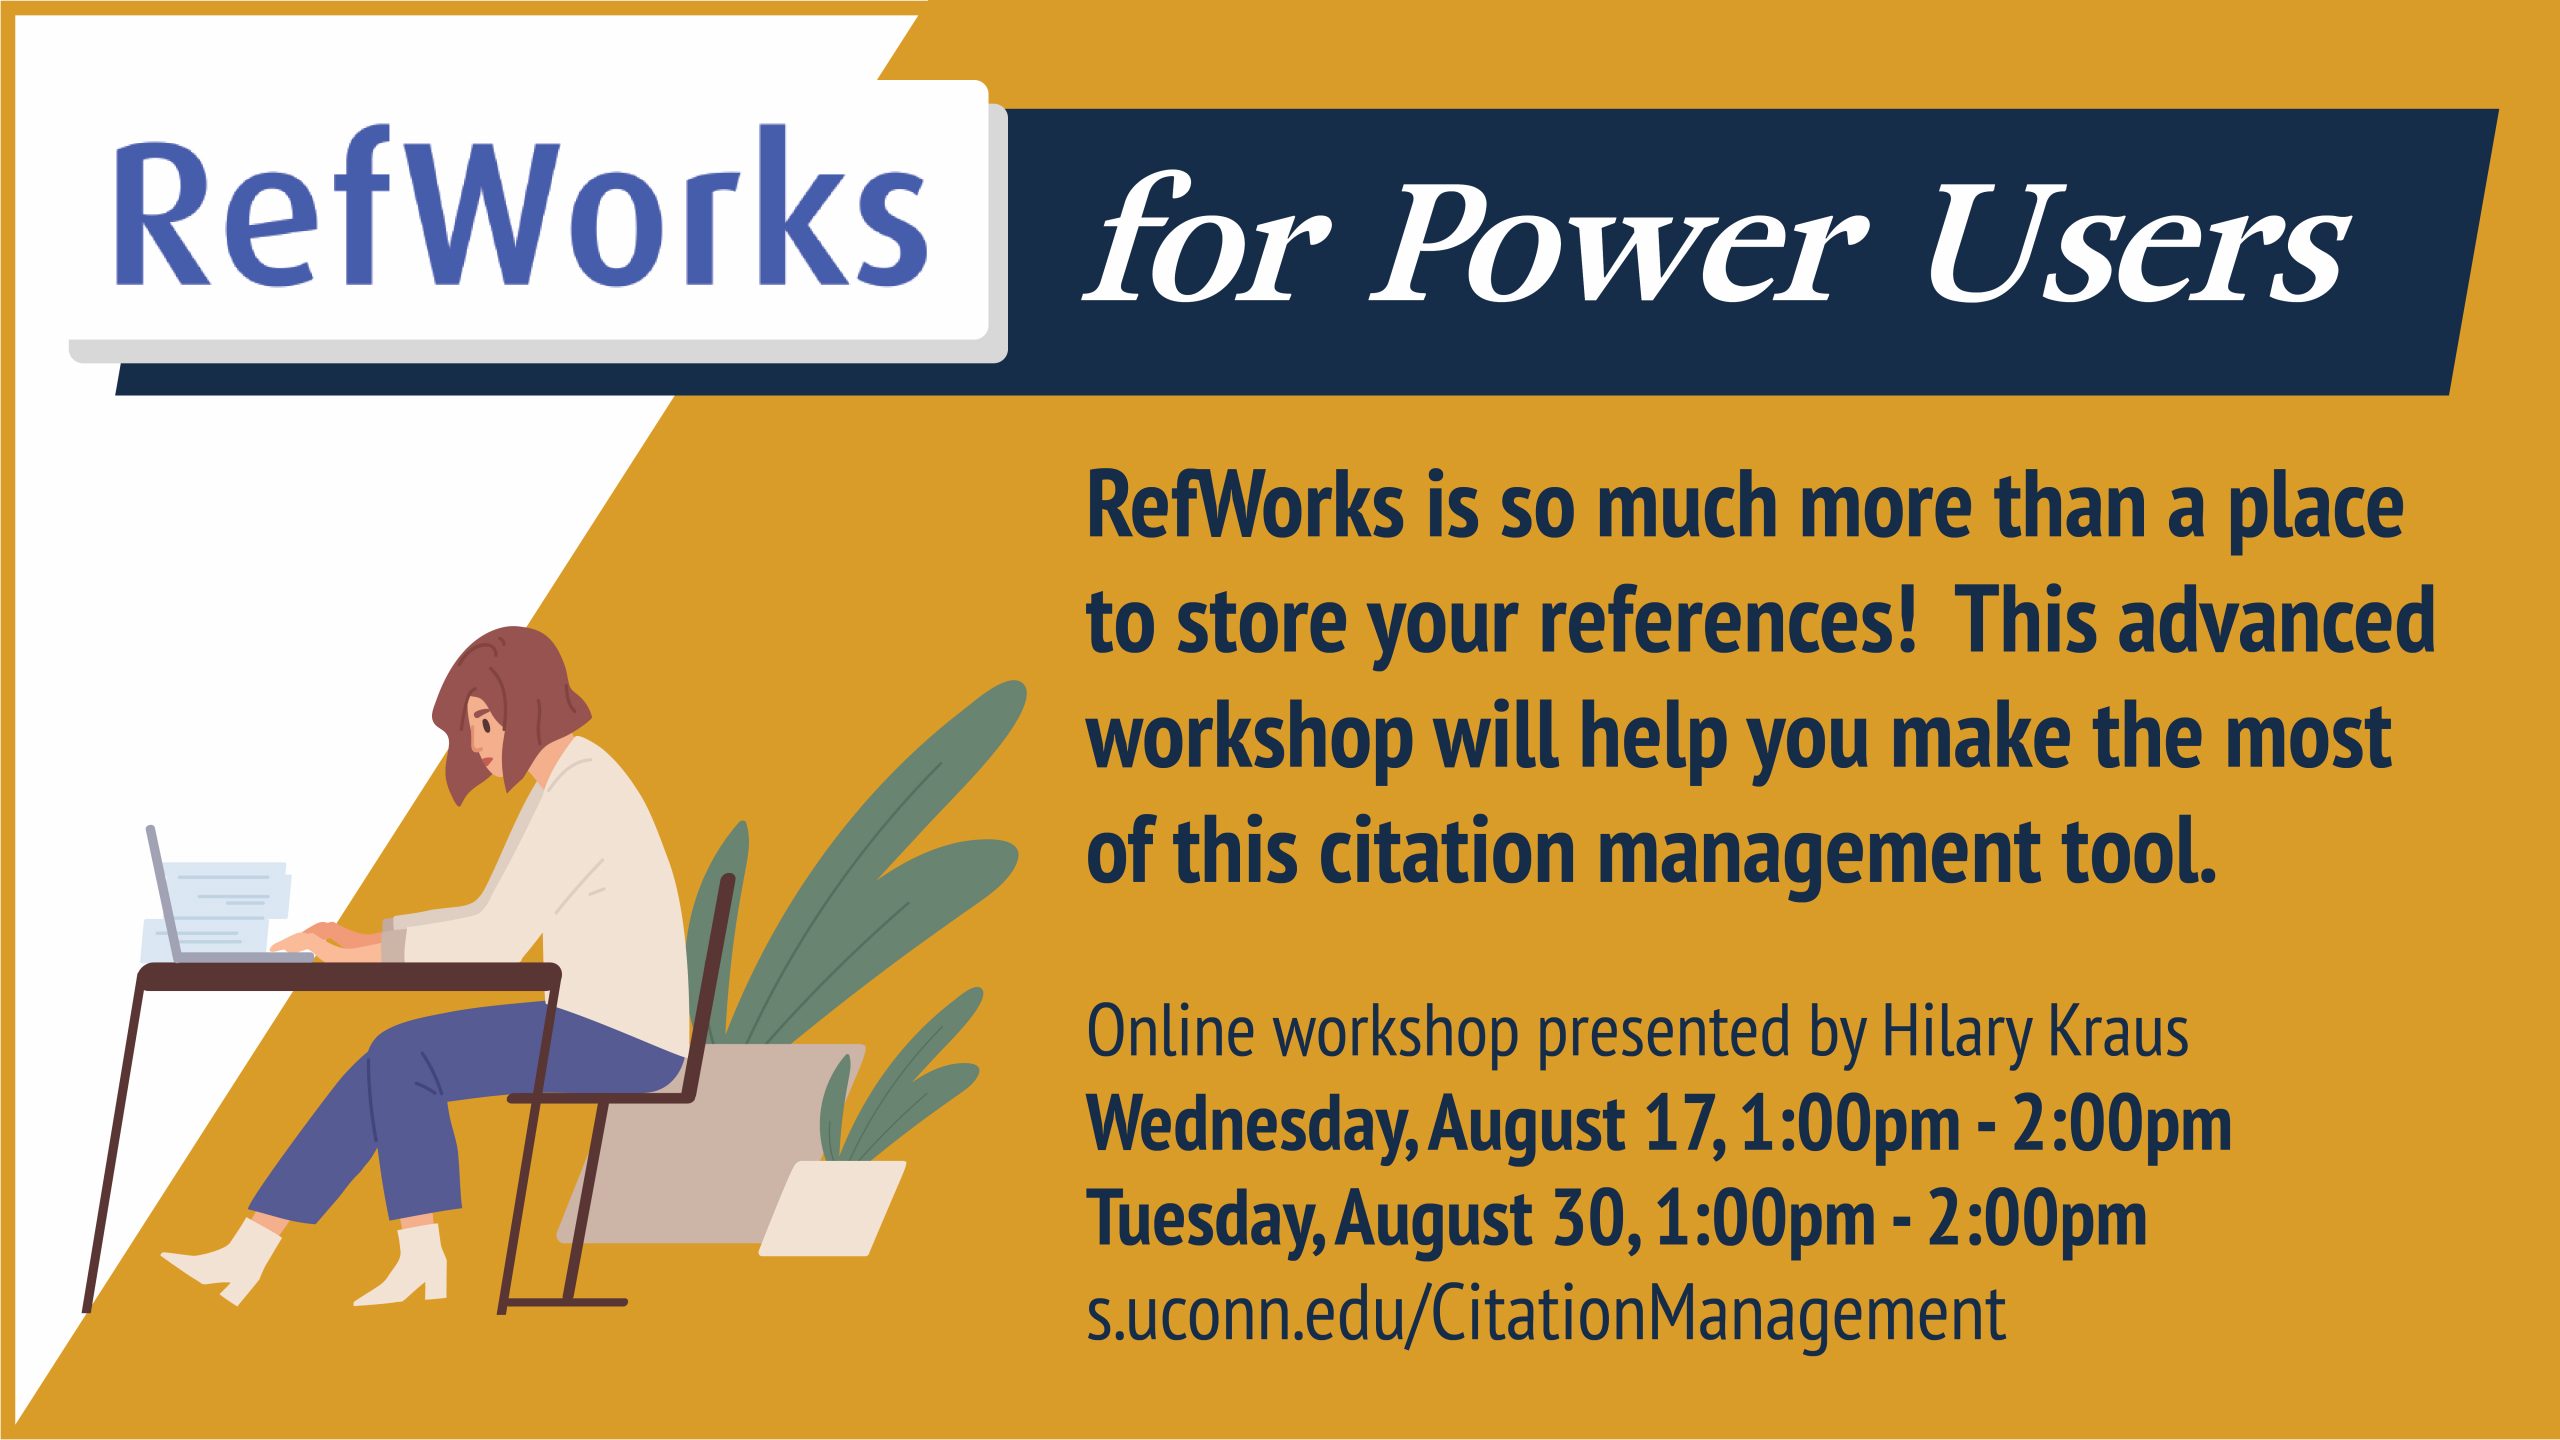 Marketing image with graphic of a seated person using a laptop with the text: Refworks for Power Users, RefWorks is so much more than a place to store your references! This advanced workshop will help you make the most of this citation management tool. Online workshop presented by Hilary Kraus: Wednesday, August 17, 1:00pm - 2:00pm, Tuesday, August 30, 1:00pm - 2:00pm, s.uconn.edu/CitationManagement